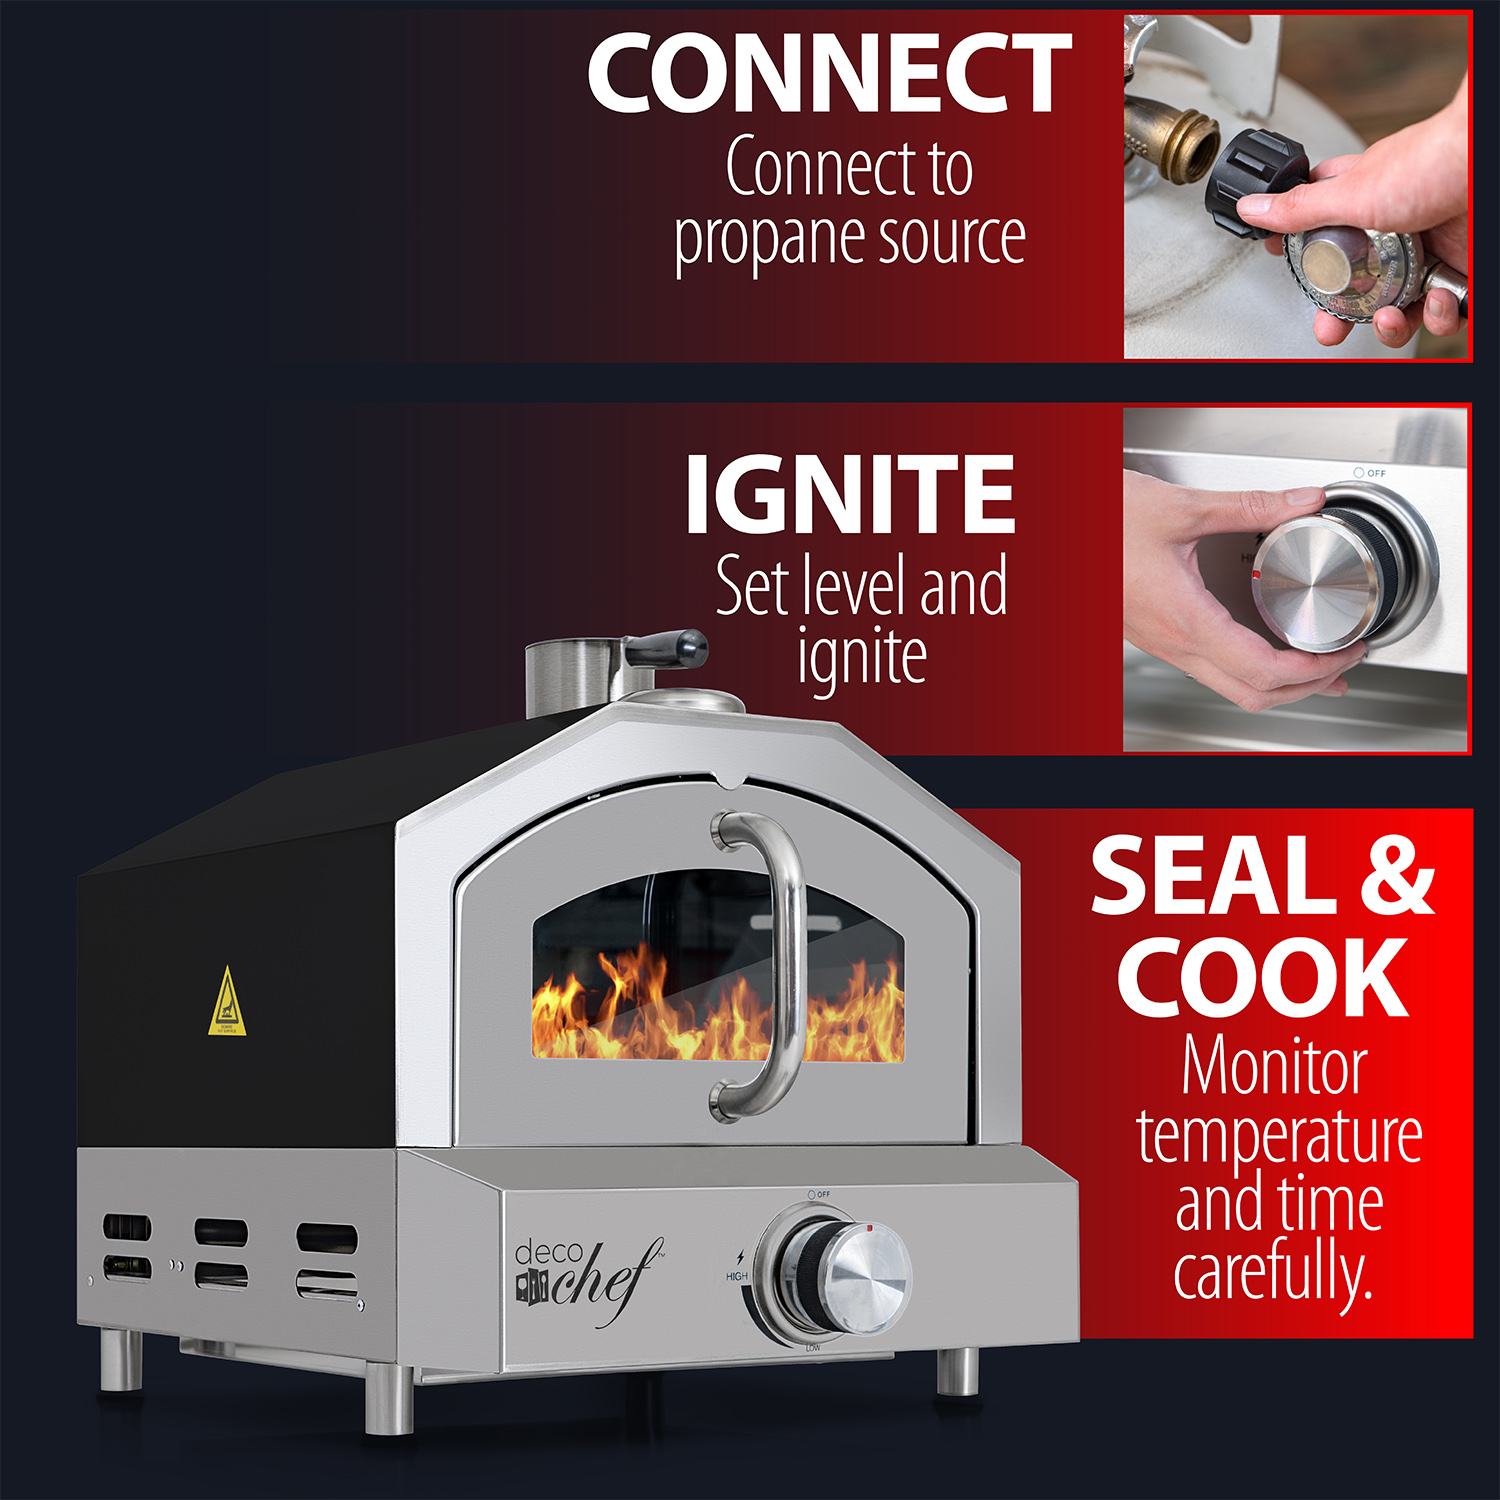 Deco Chef Portable Outdoor Pizza Oven and Grill with Propane Gas CSA Approved Regulator and Hose, Includes Pizza Peel, Stone, Built-In Thermometer, and Grill Rack, Black - image 4 of 11